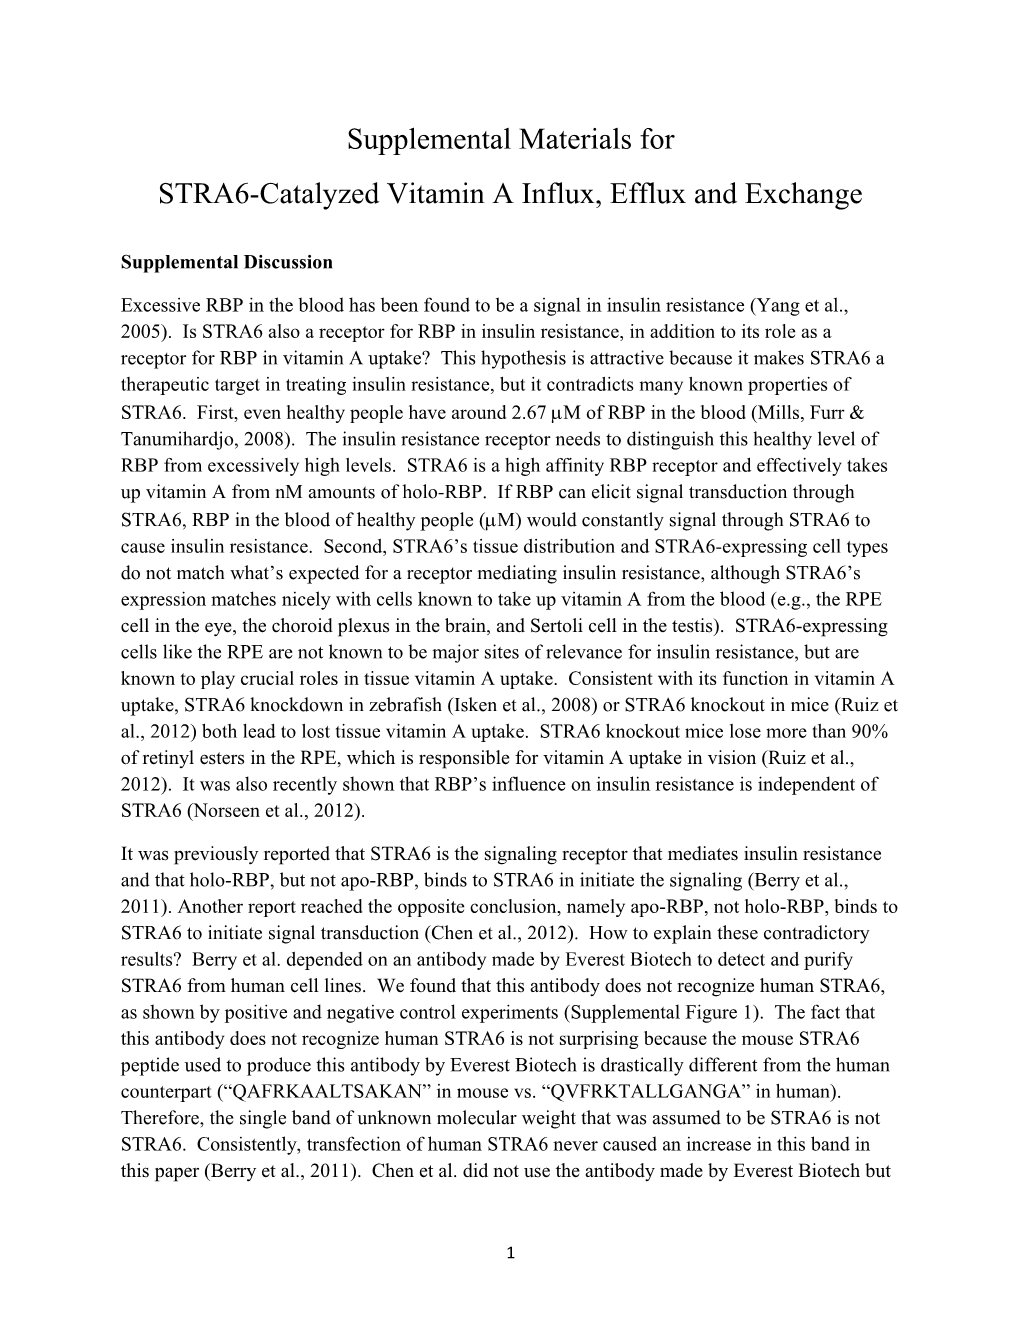 STRA6-Catalyzed Vitamin a Influx, Efflux and Exchange